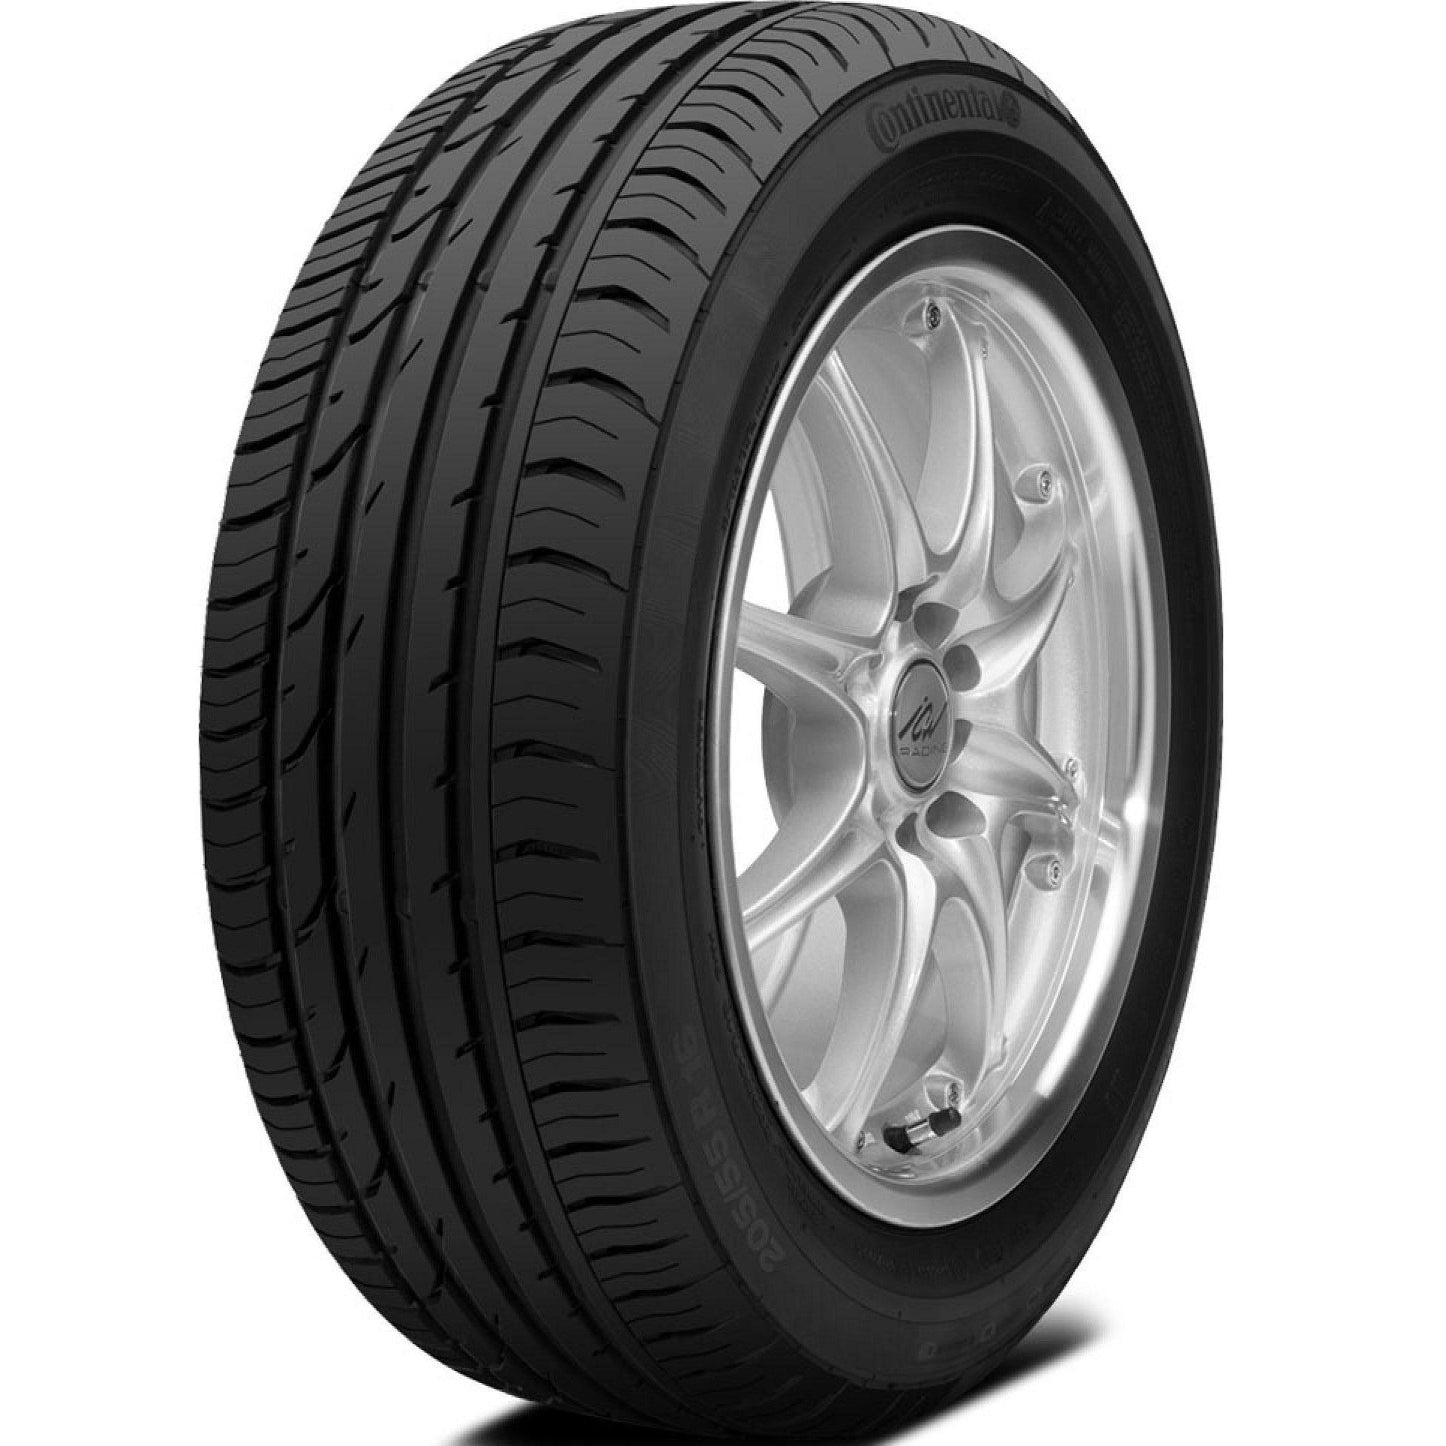 CONTINENTAL CONTIPREMIUMCONTACT 2 225/50R16 (24.9X8.9R 16) Tires